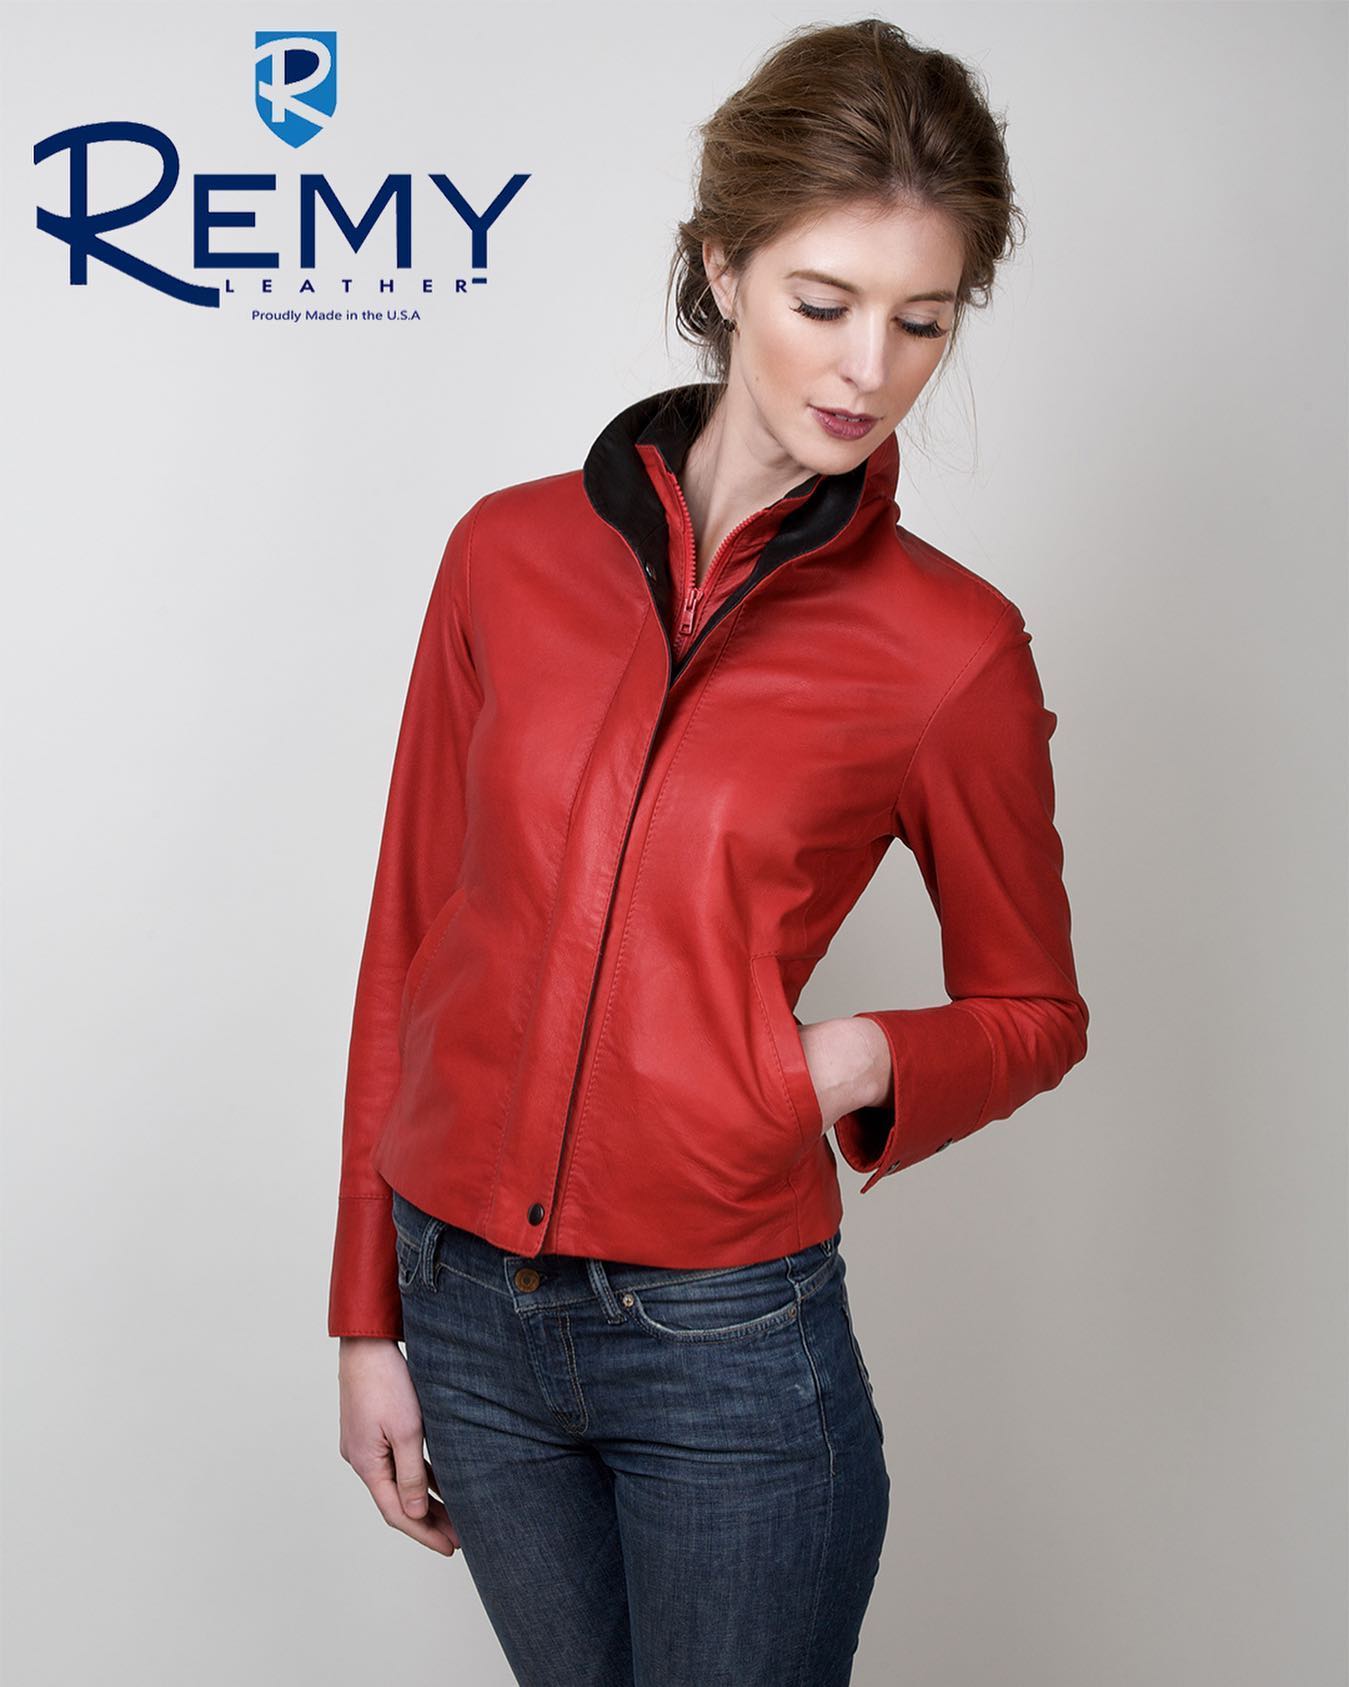 Women's Remy Red Double Collar Light Leather